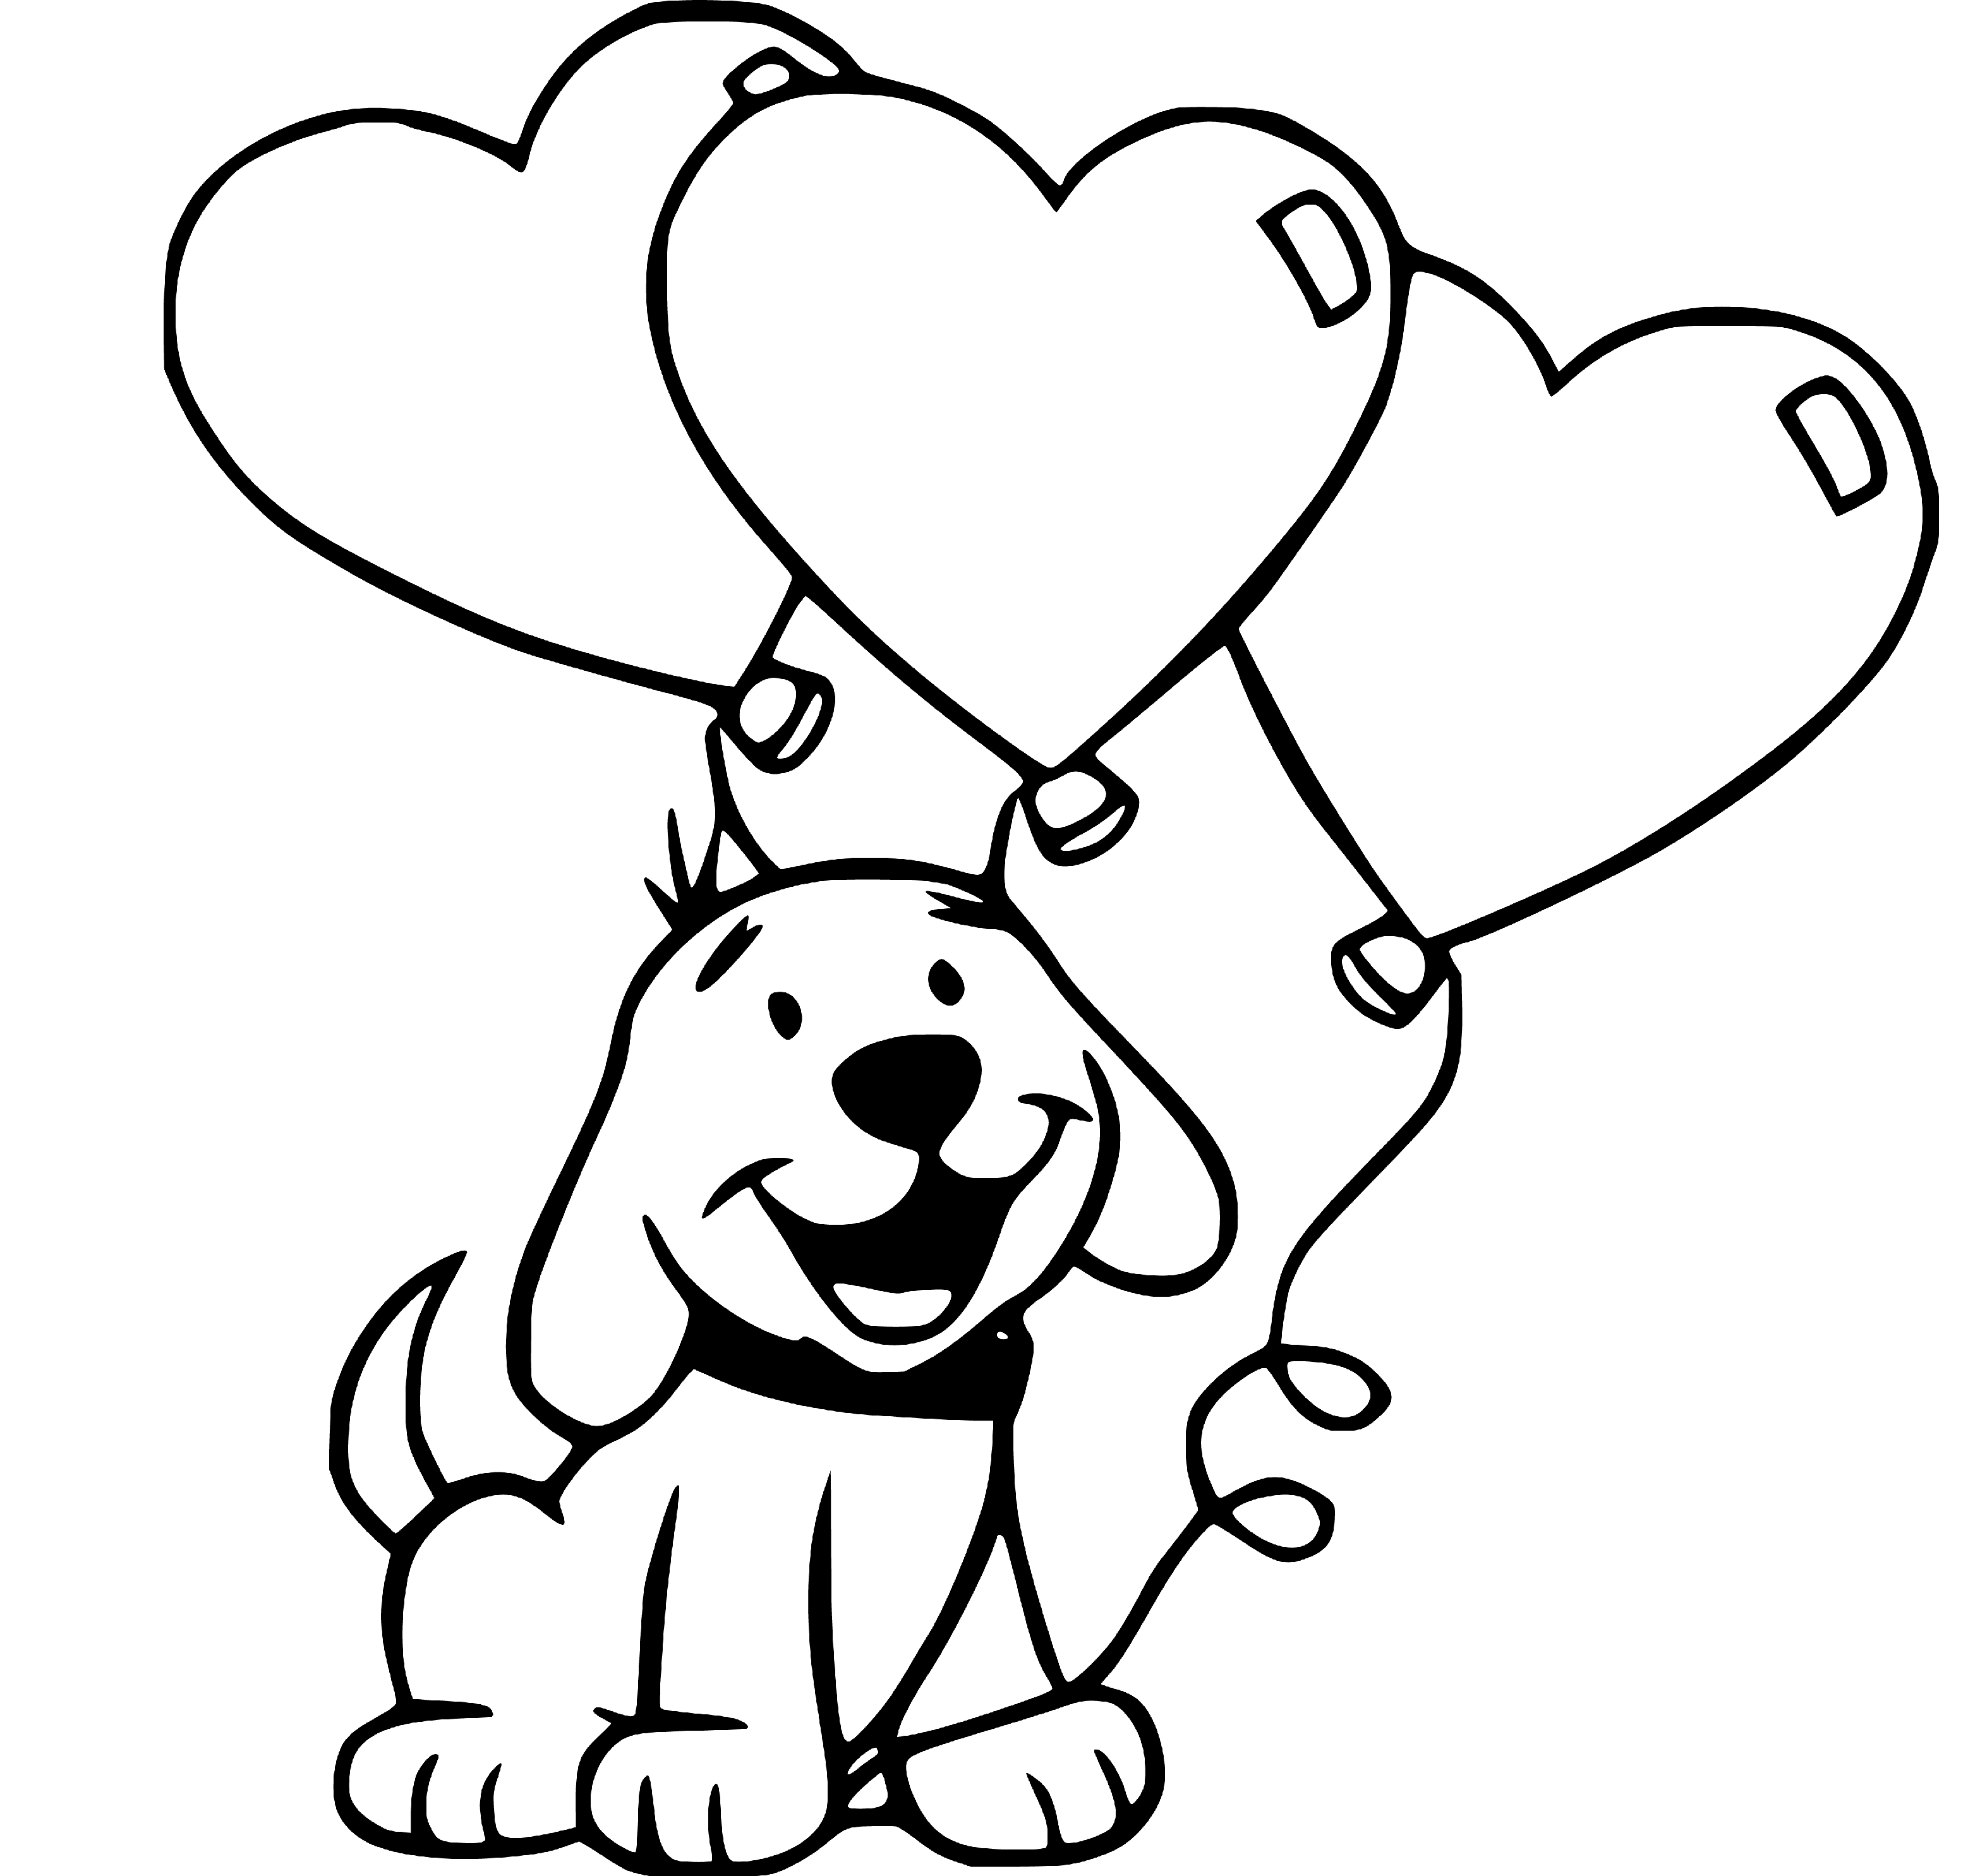 Printable Puppy holding balloons Coloring Page for kids.